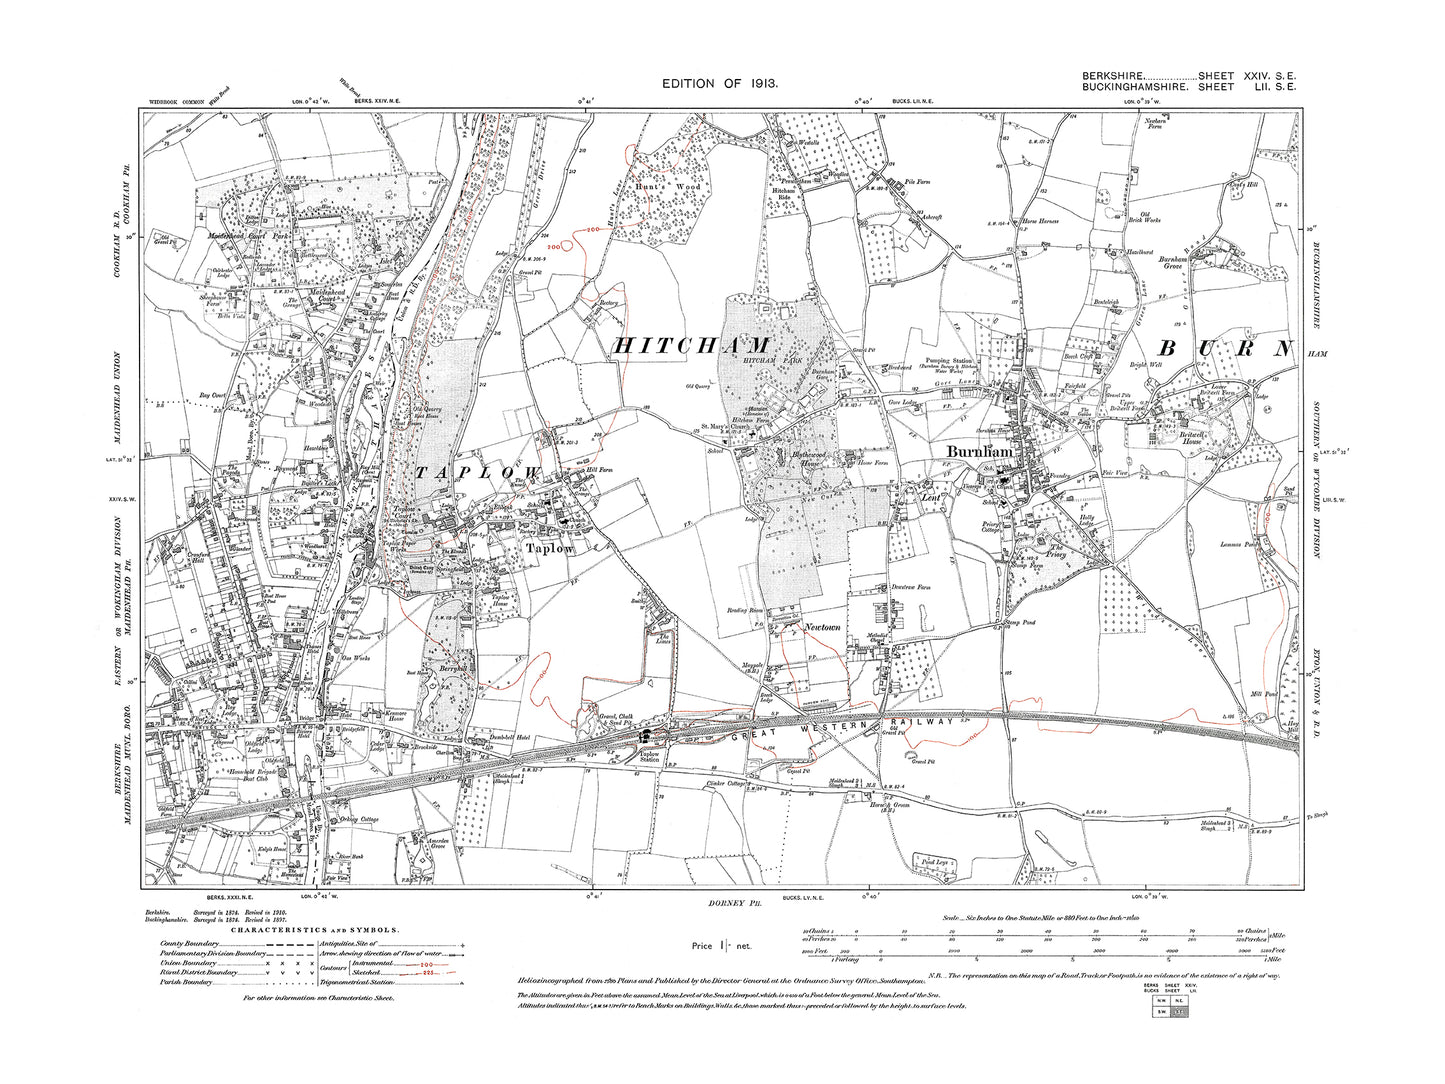 A 1913 map showing Maidenhead (east) in Berkshire - OS 1:10560 scale map, Berks 24SE